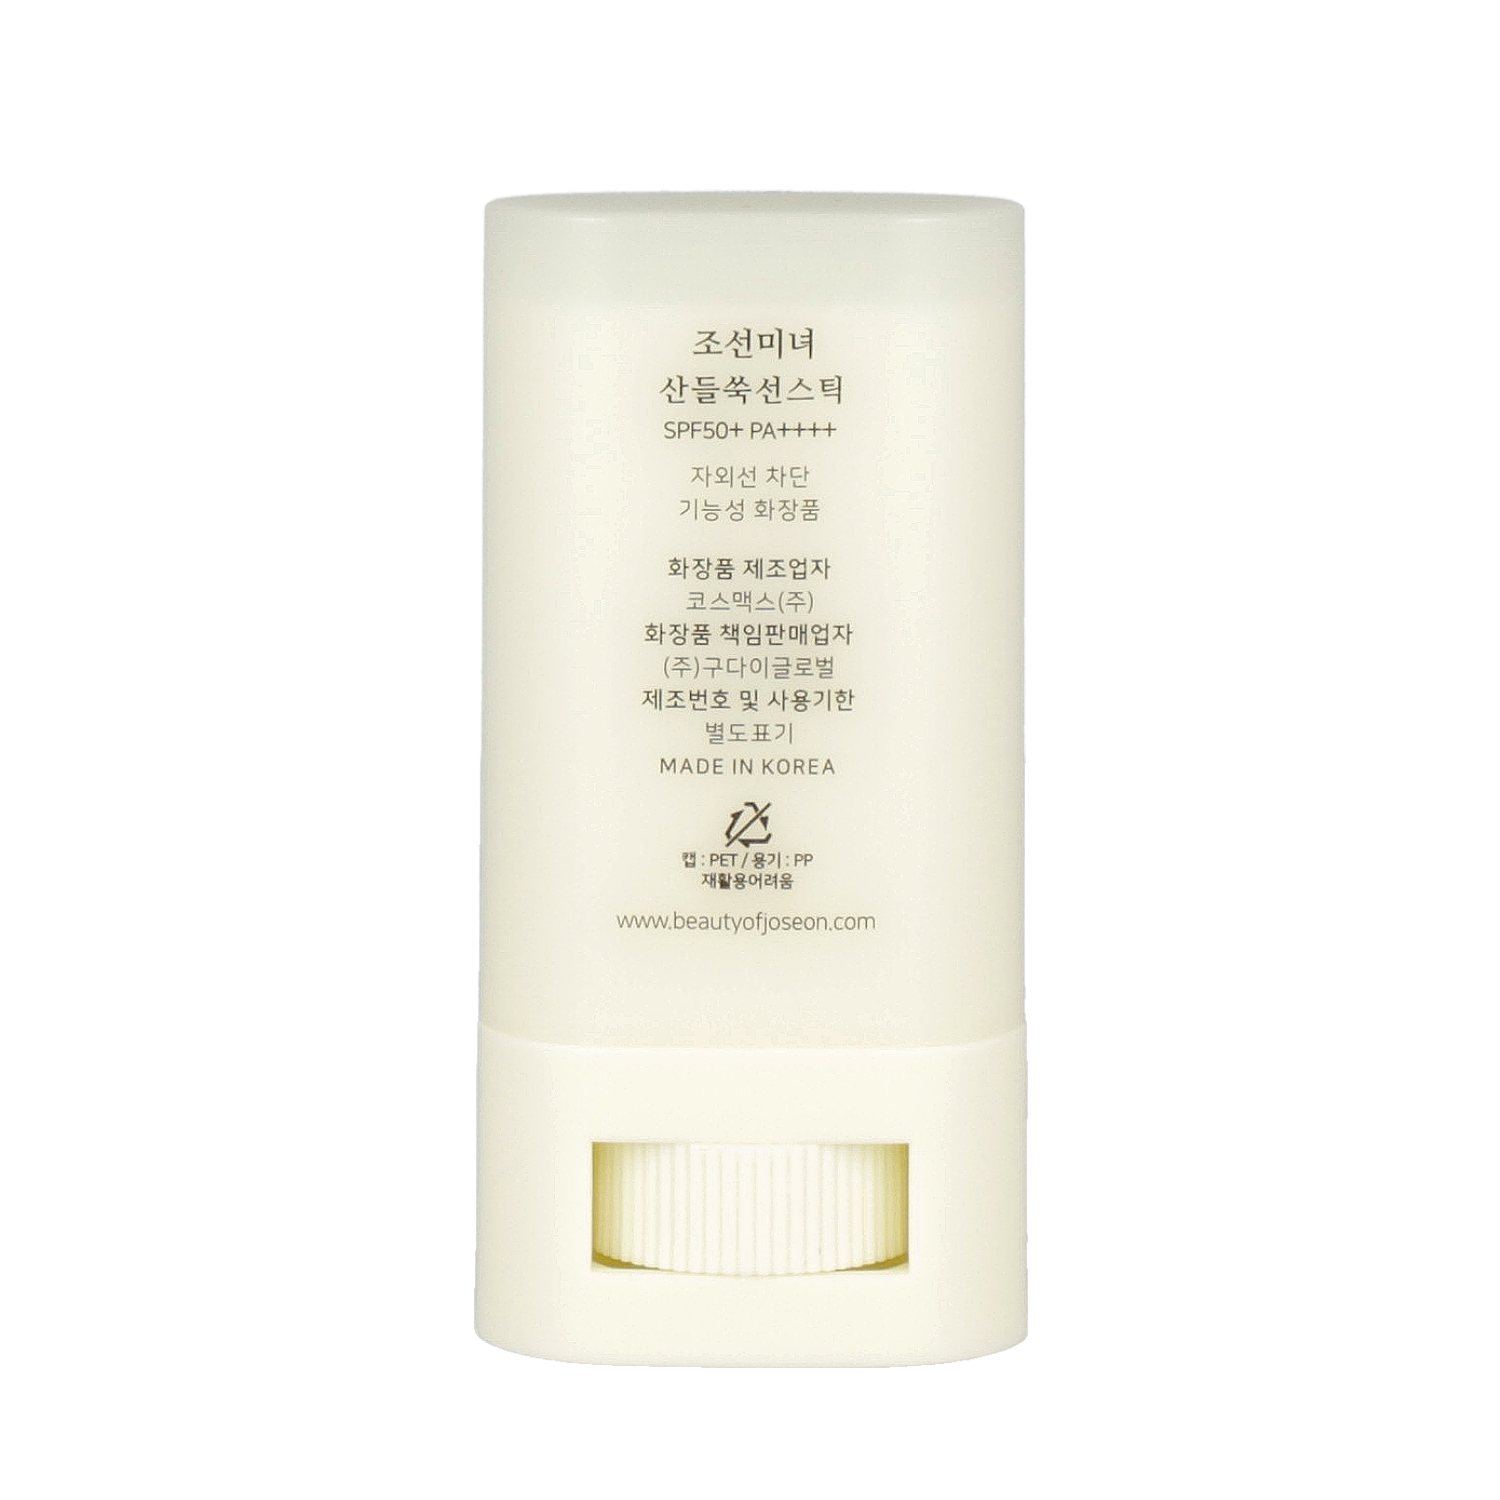 Sun protection stick with Mugwort and Camelia by Beauty of Joseon, 18g